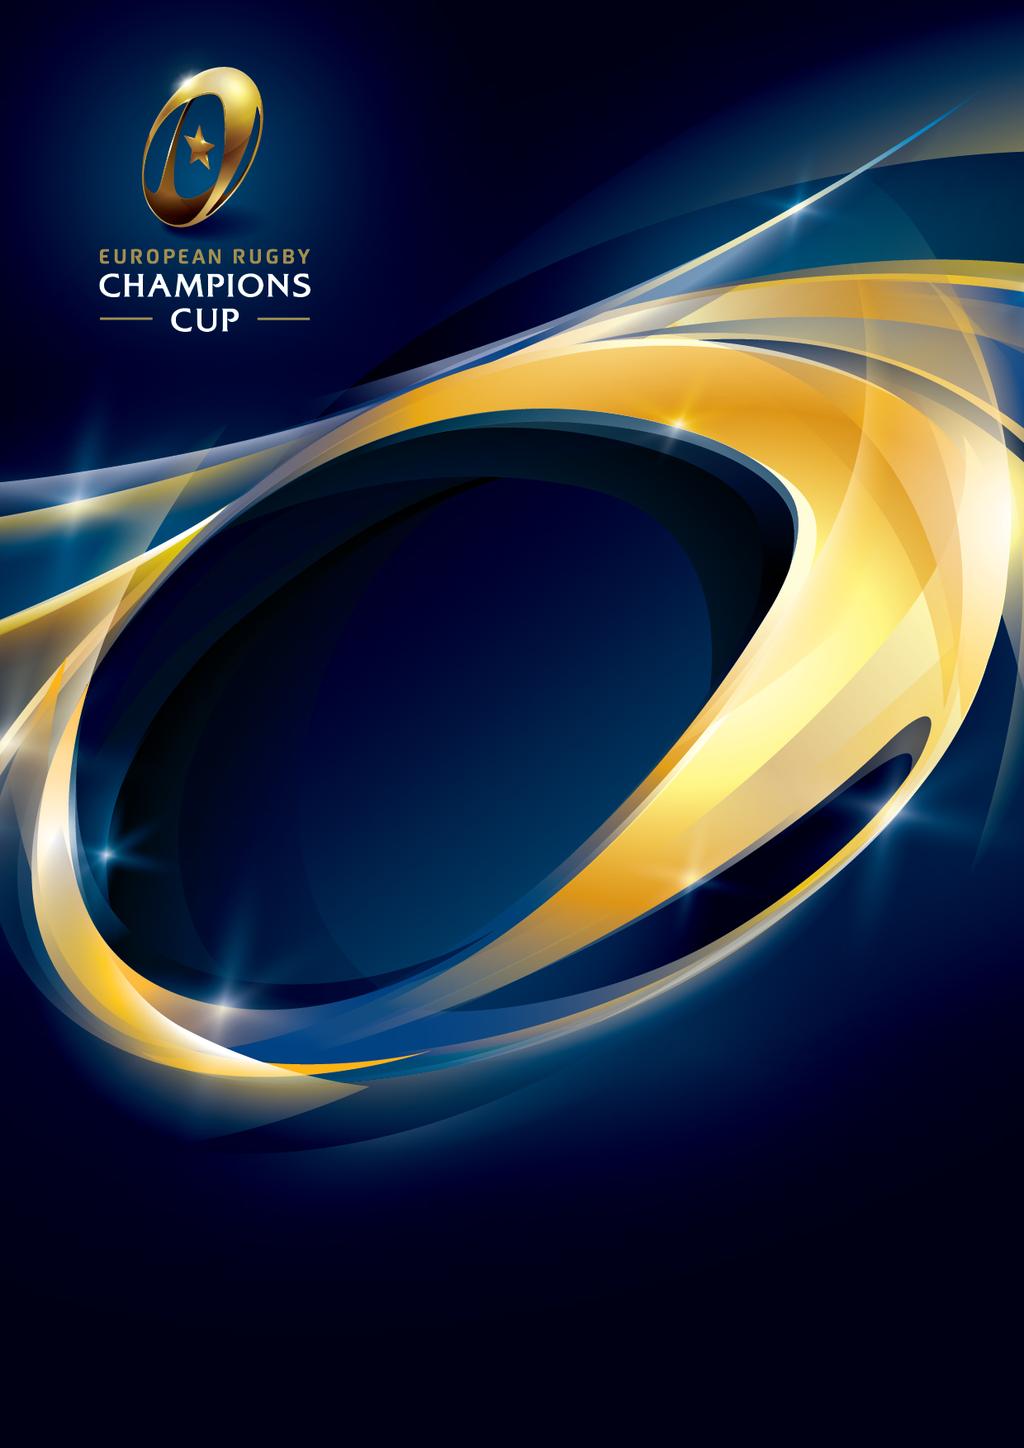 [Type text] Champions Cup 2017/18